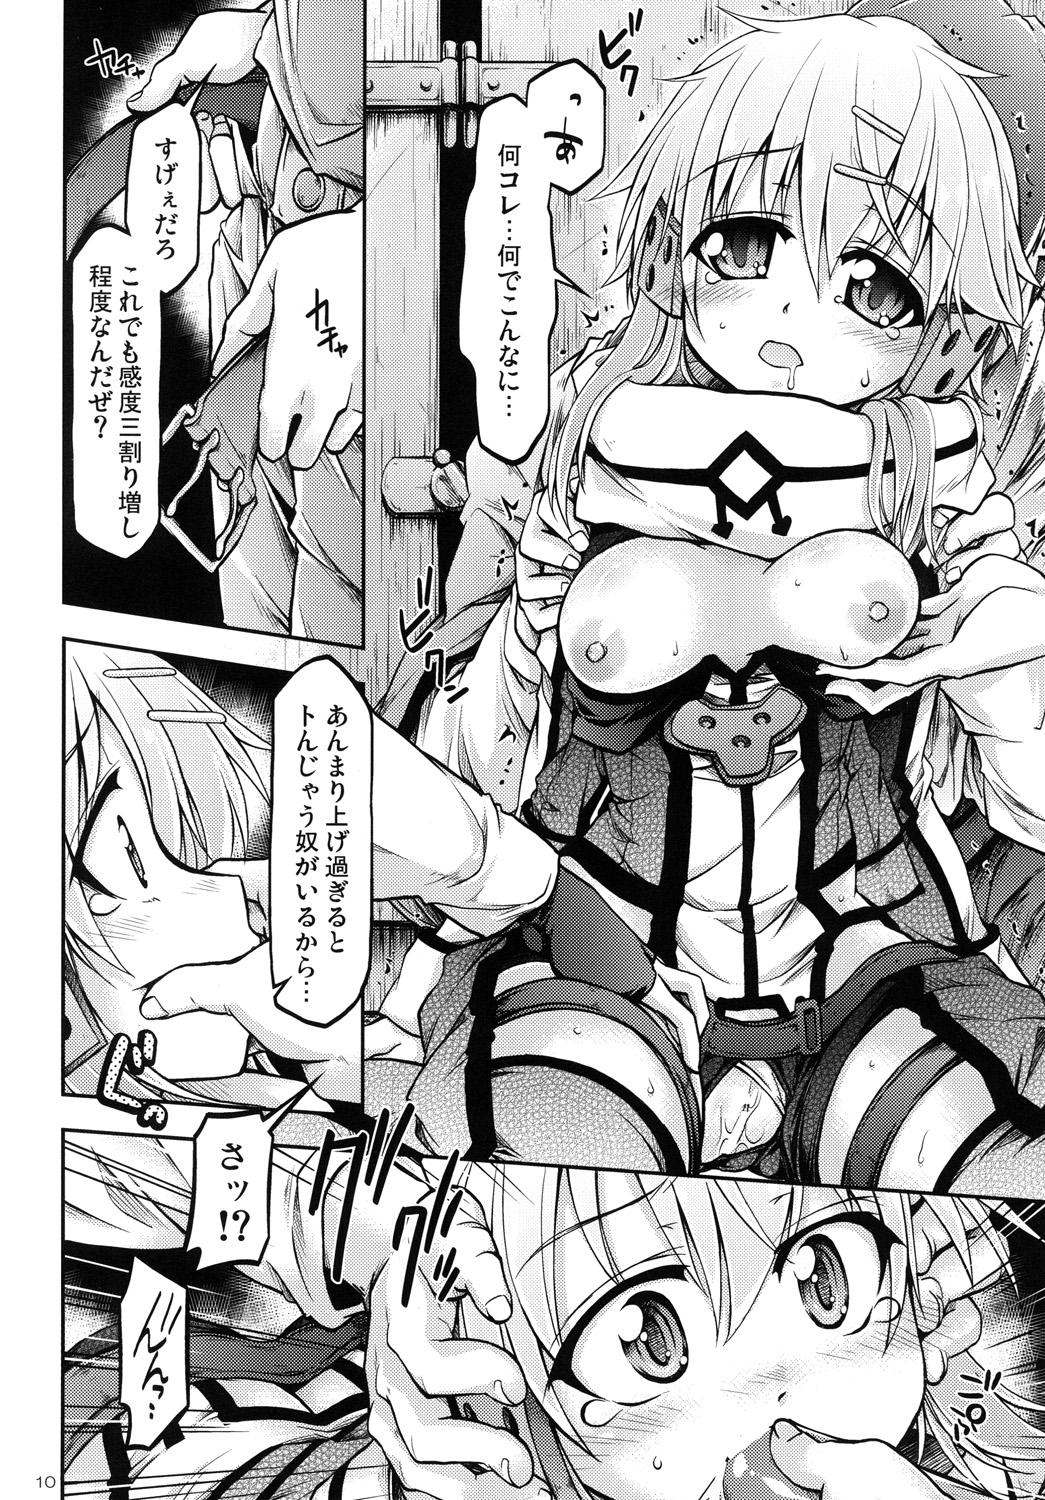 Rimming Gspot - Sword art online Leche - Page 9